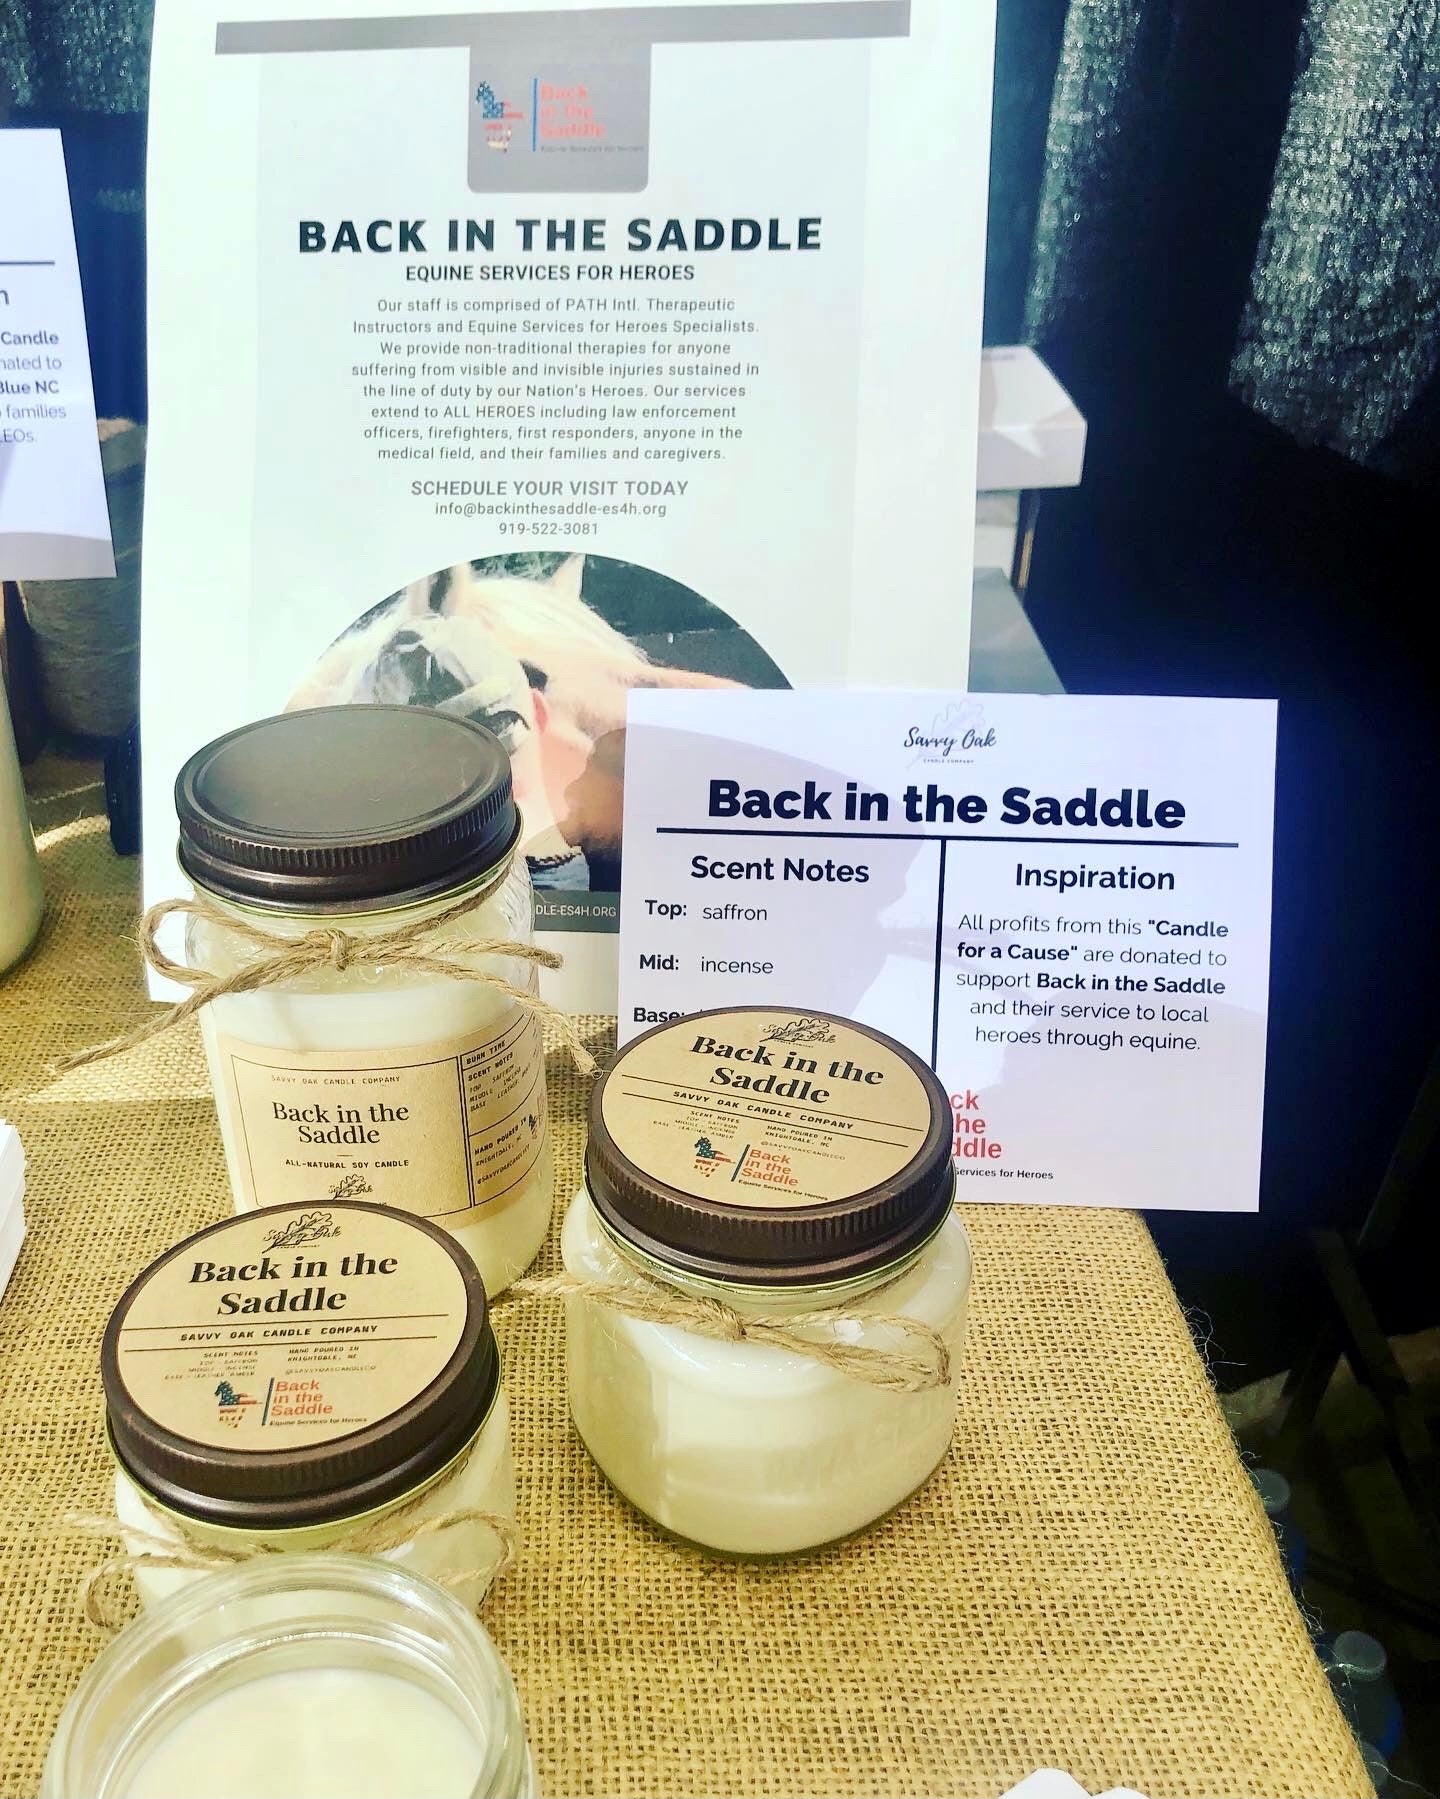 Back in the Saddle Candle for Back in the Saddle - Equine Services for Heroes